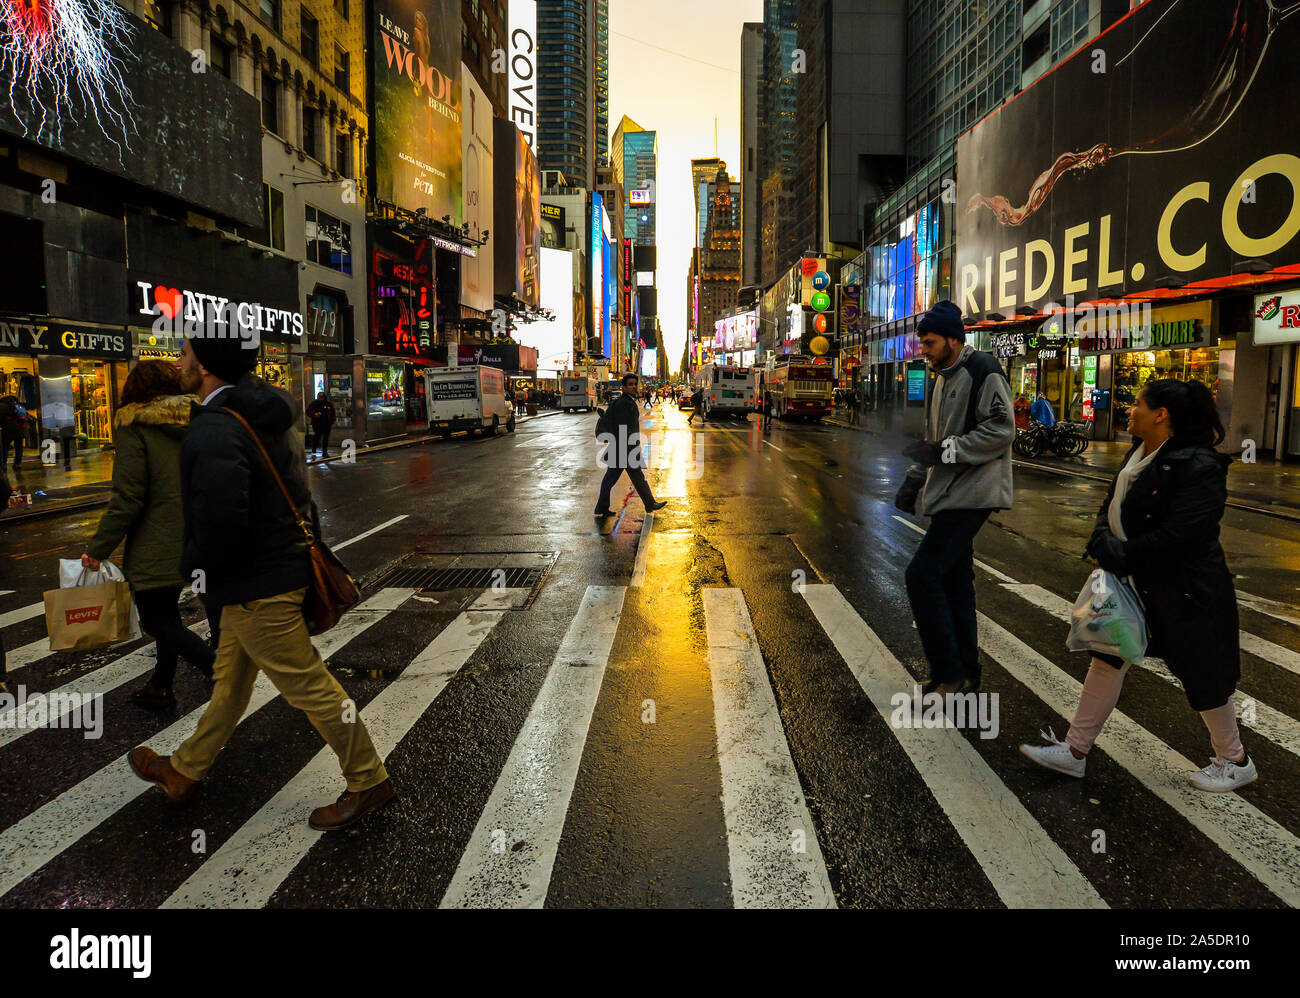 New York/USA - 01/30/19 - Times square after a brief but heavy rain shower  just before sunset Stock Photo - Alamy